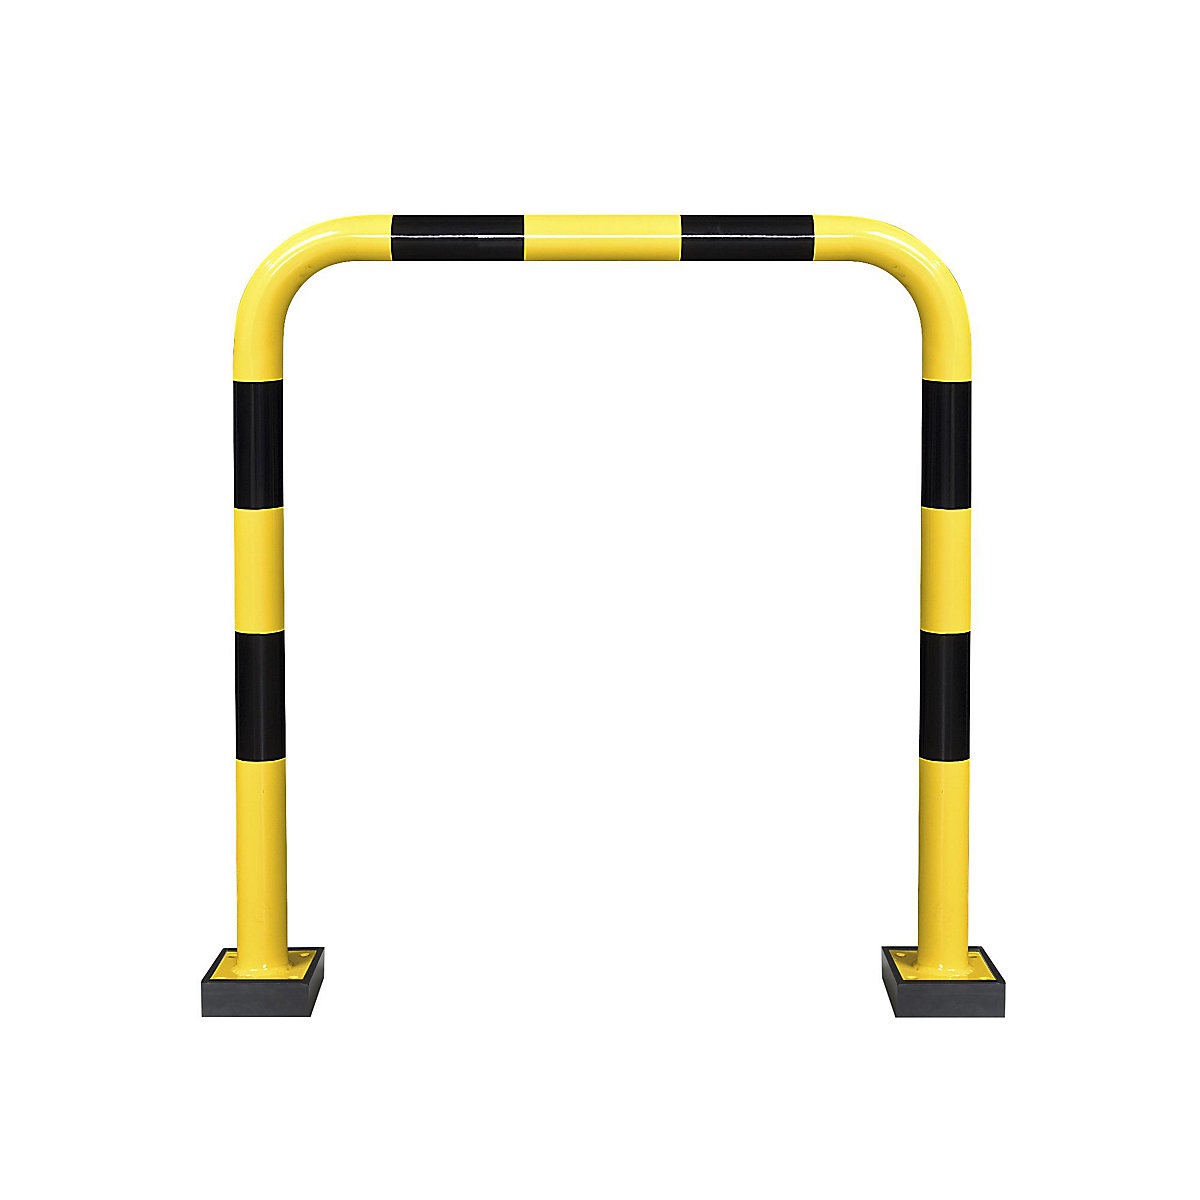 Crash protection bar, flexible, for outdoor use, HxW 1240 x 1000 mm